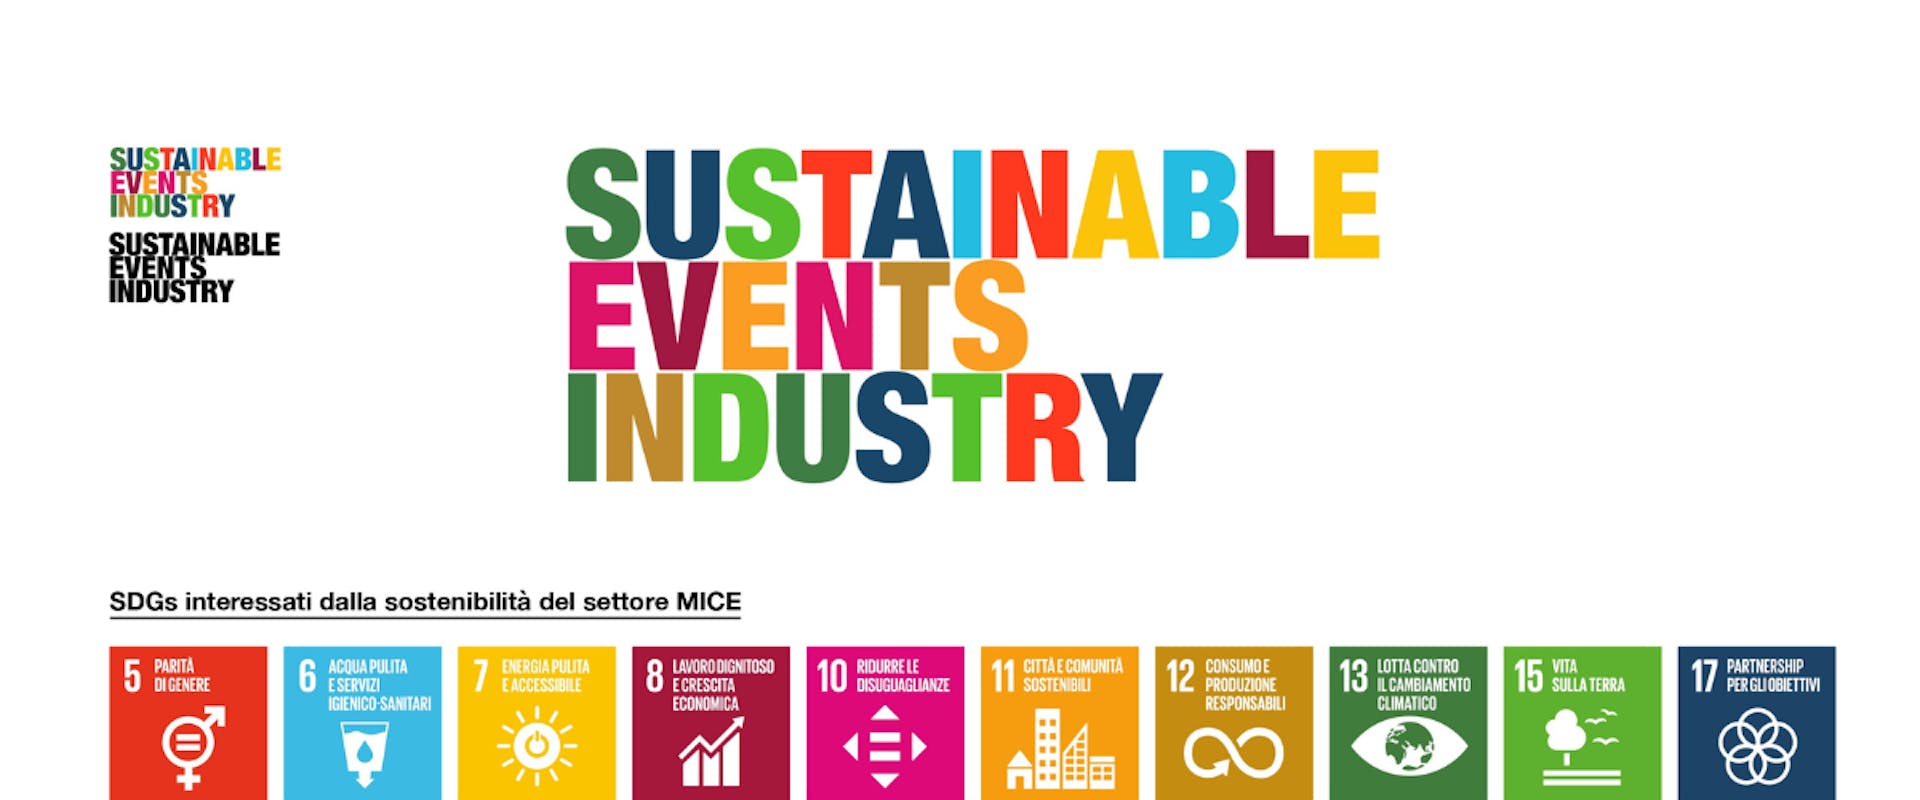 Sustainable events industry